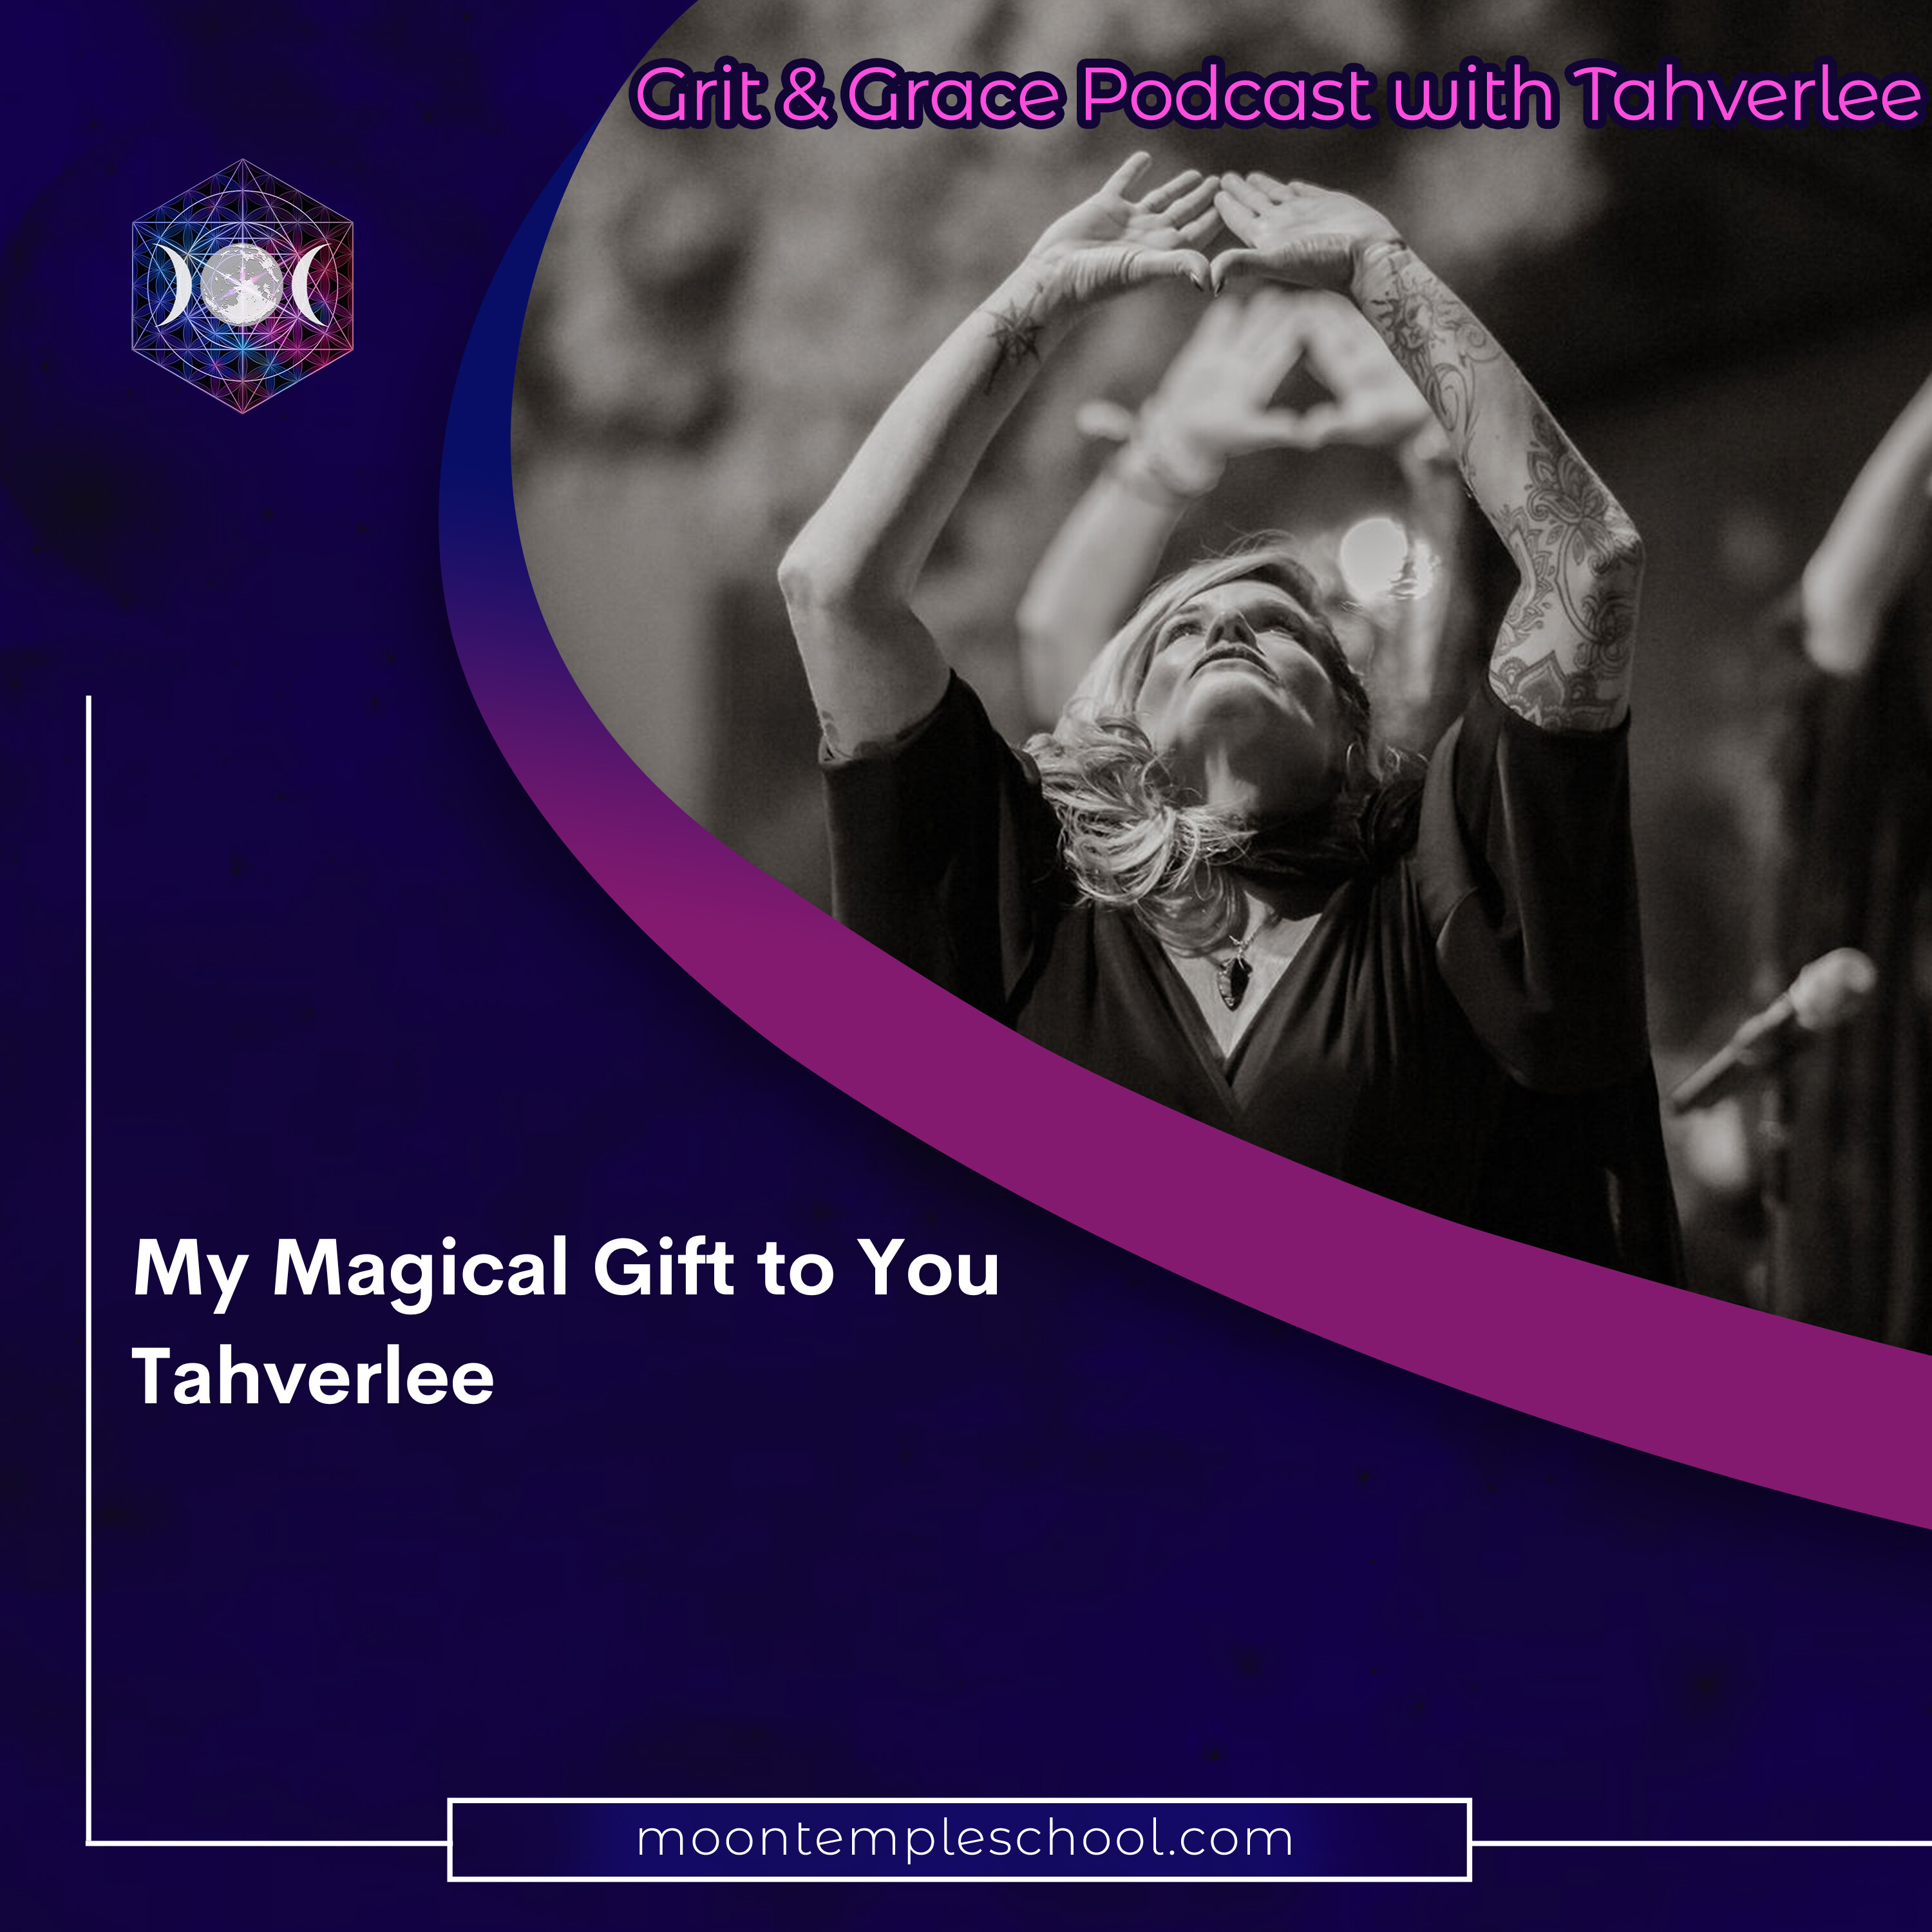 My Magical Gift to You